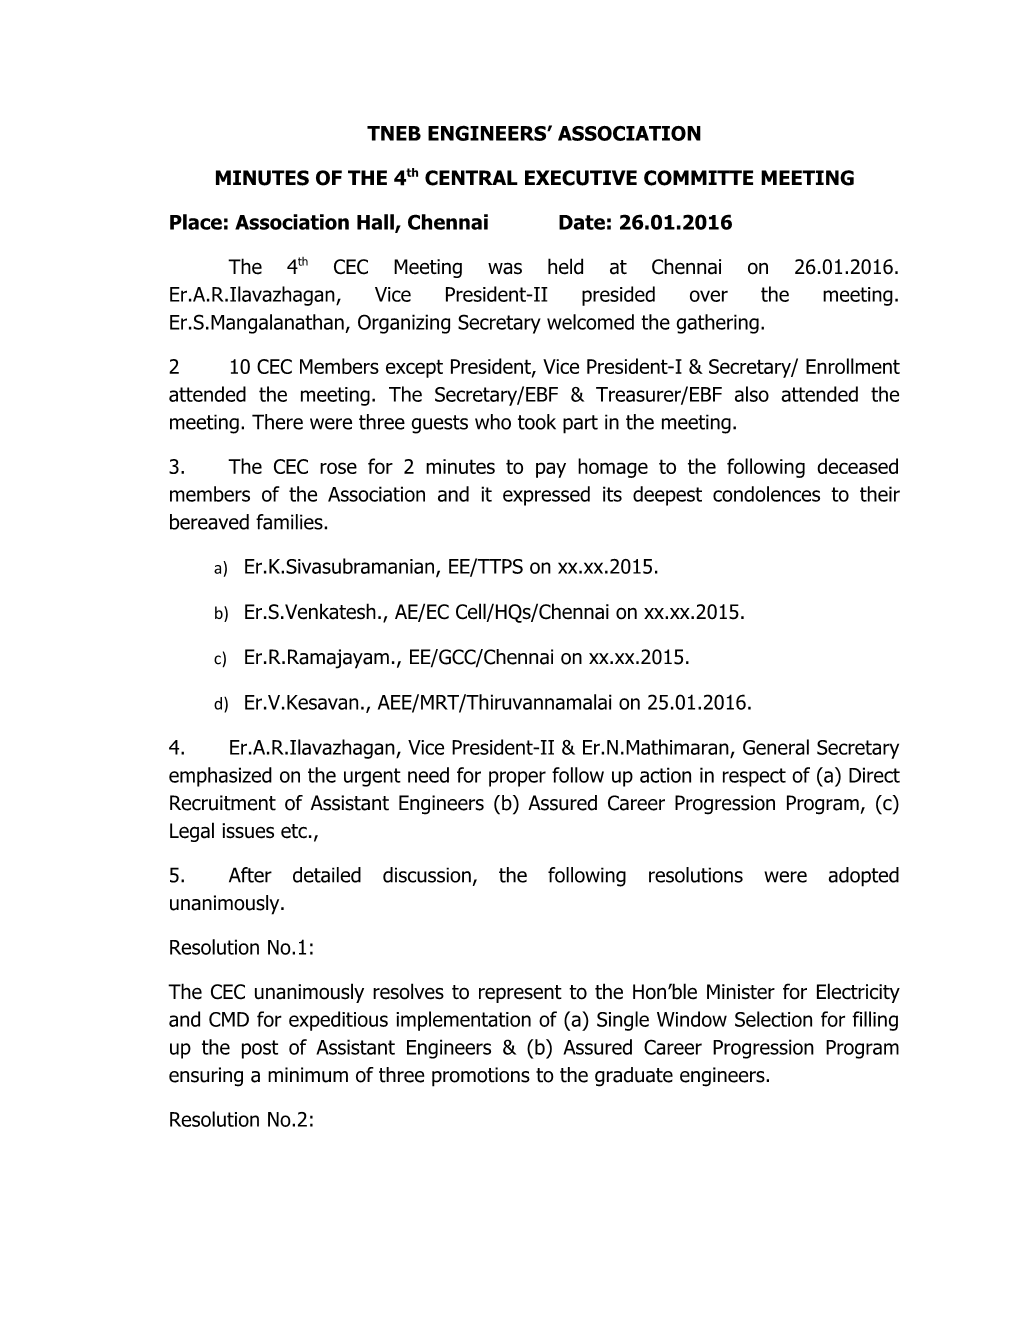 MINUTES of the 4Thcentral EXECUTIVE COMMITTE MEETING